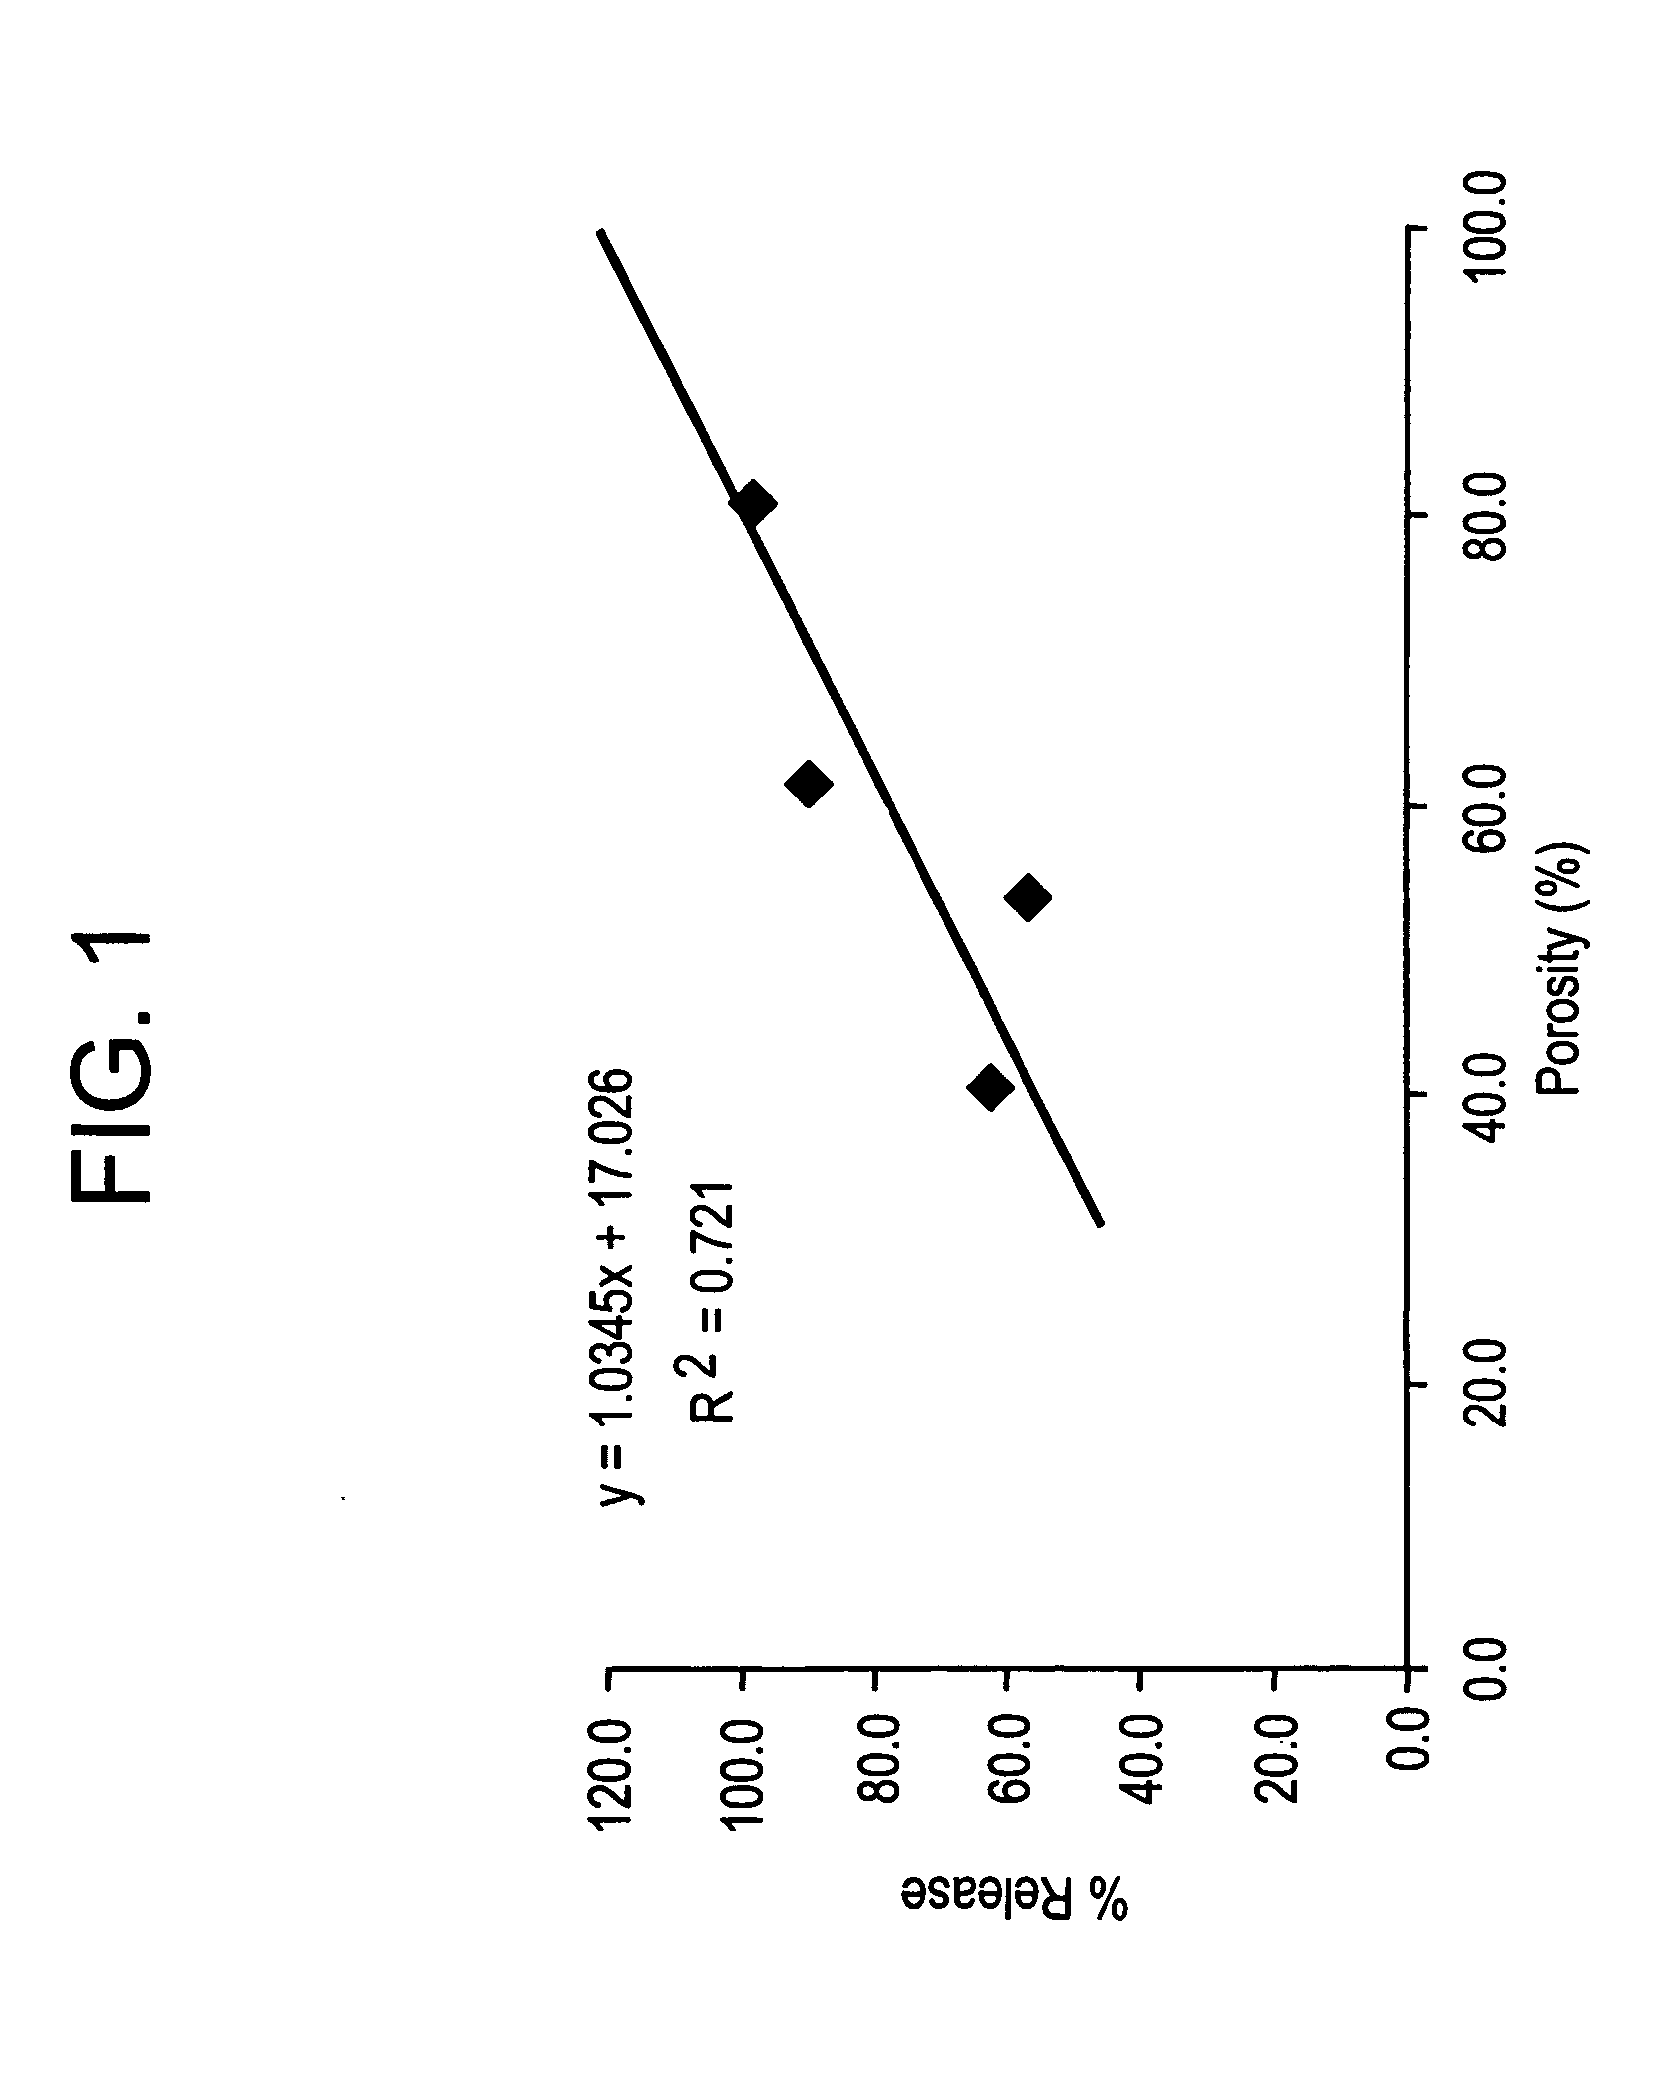 Injectable, oral, or topical sustained release pharmaceutical formulations